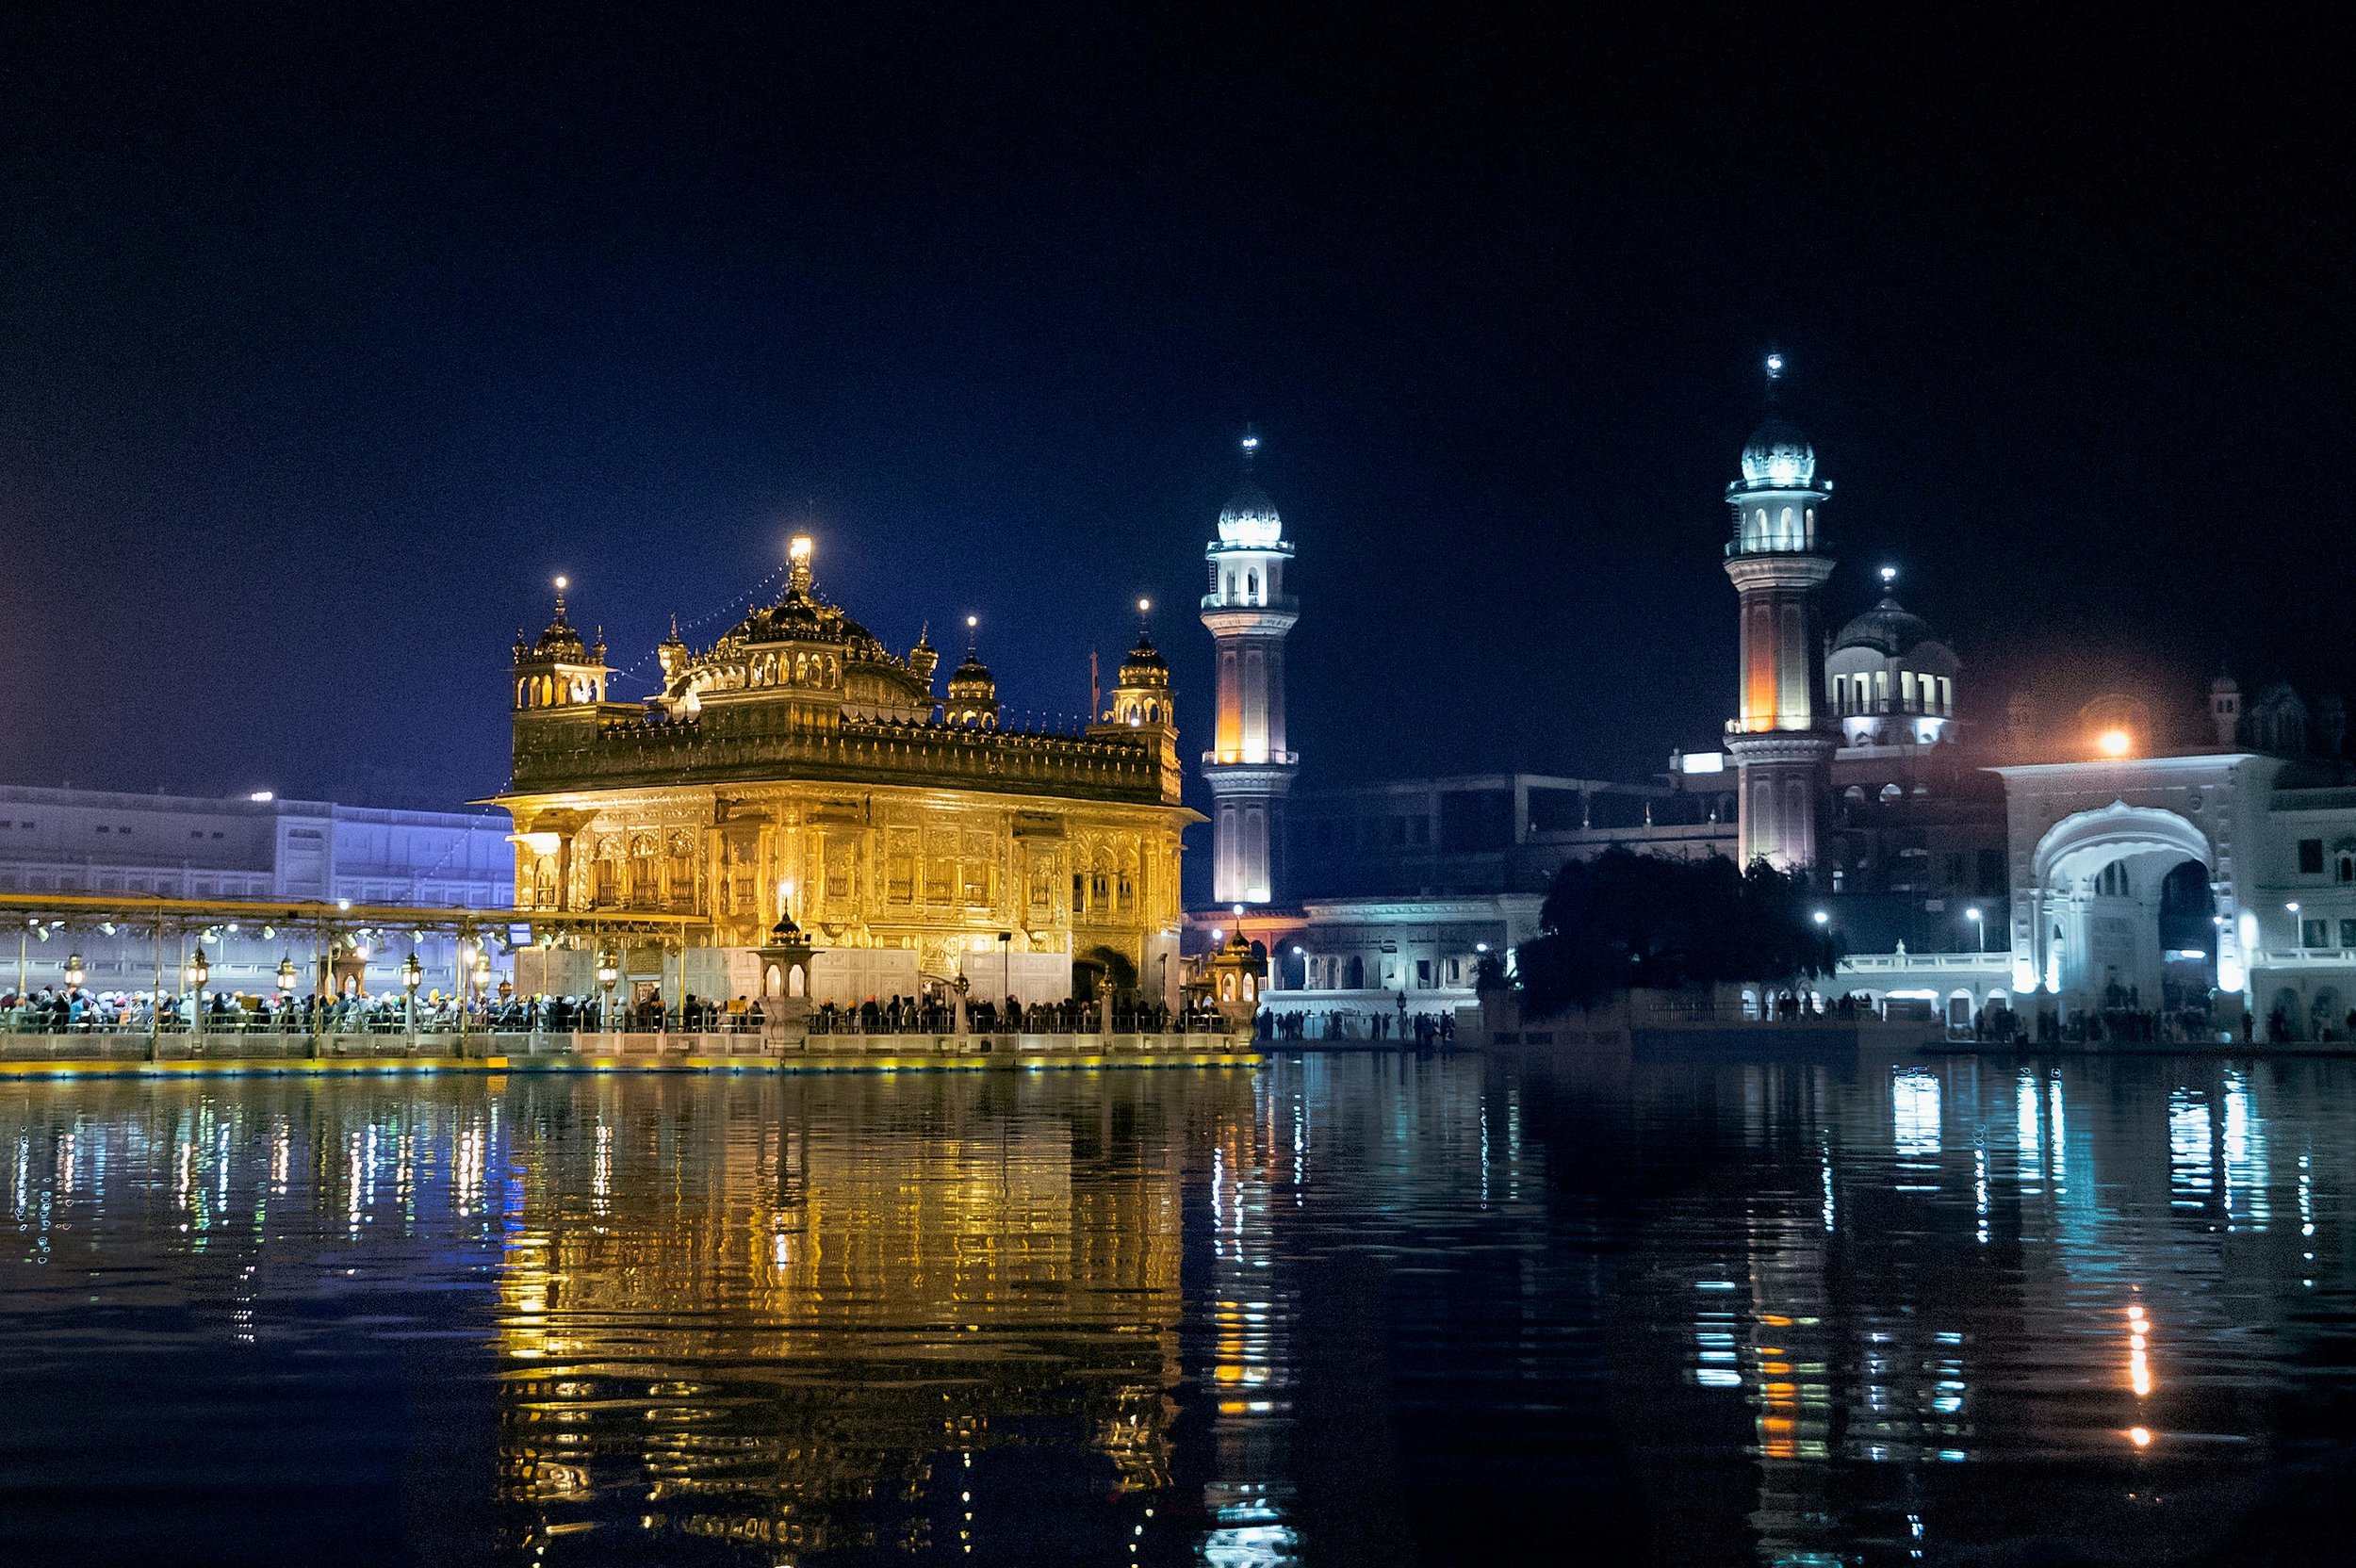  I parted with this holy place with another view of the Sri Harmandir Sahib. It's just so stunning. 